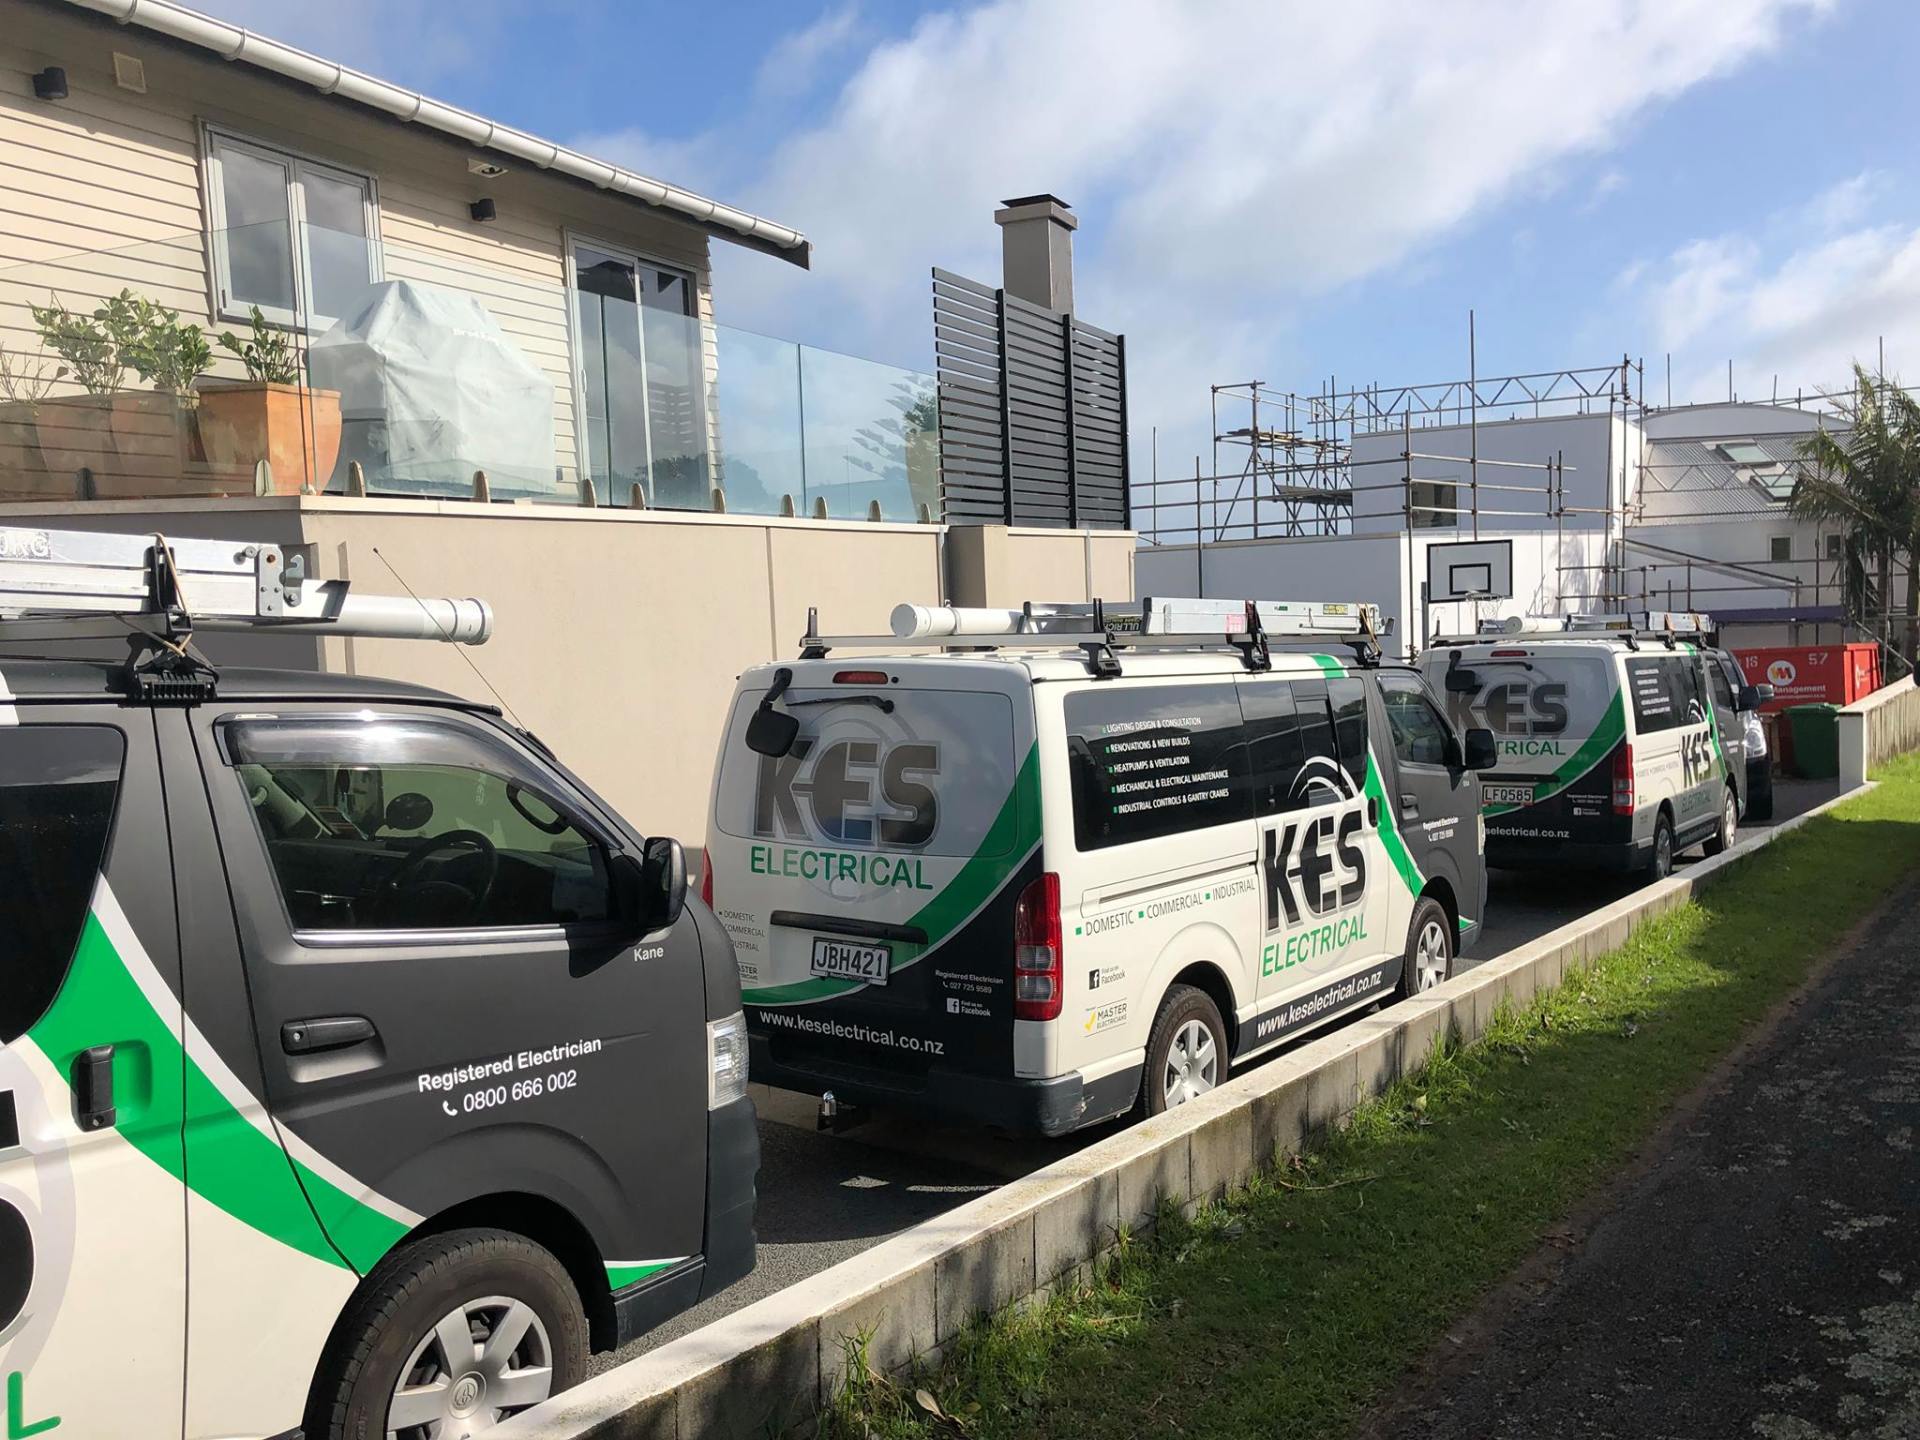 KES Electrical Vans, Renovations, Electrical Work, Electrician, Master Electrician